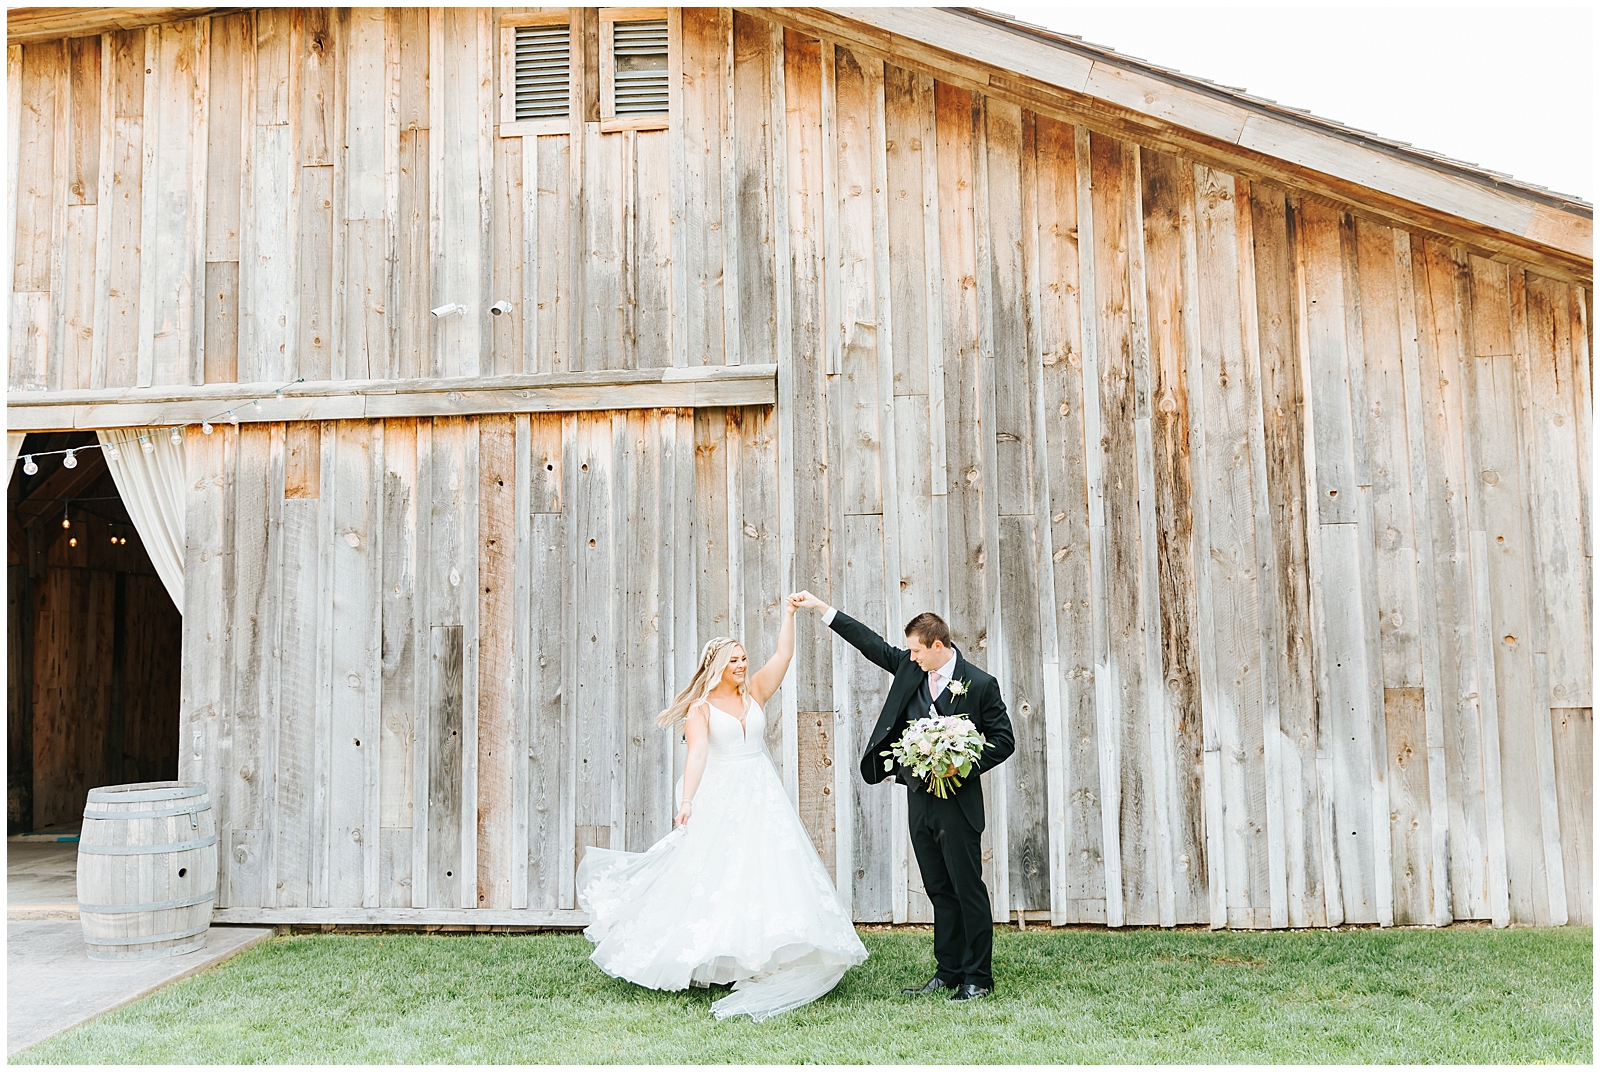 Bride and Groom Twirling by Barn at August Still Water Hollow Wedding 